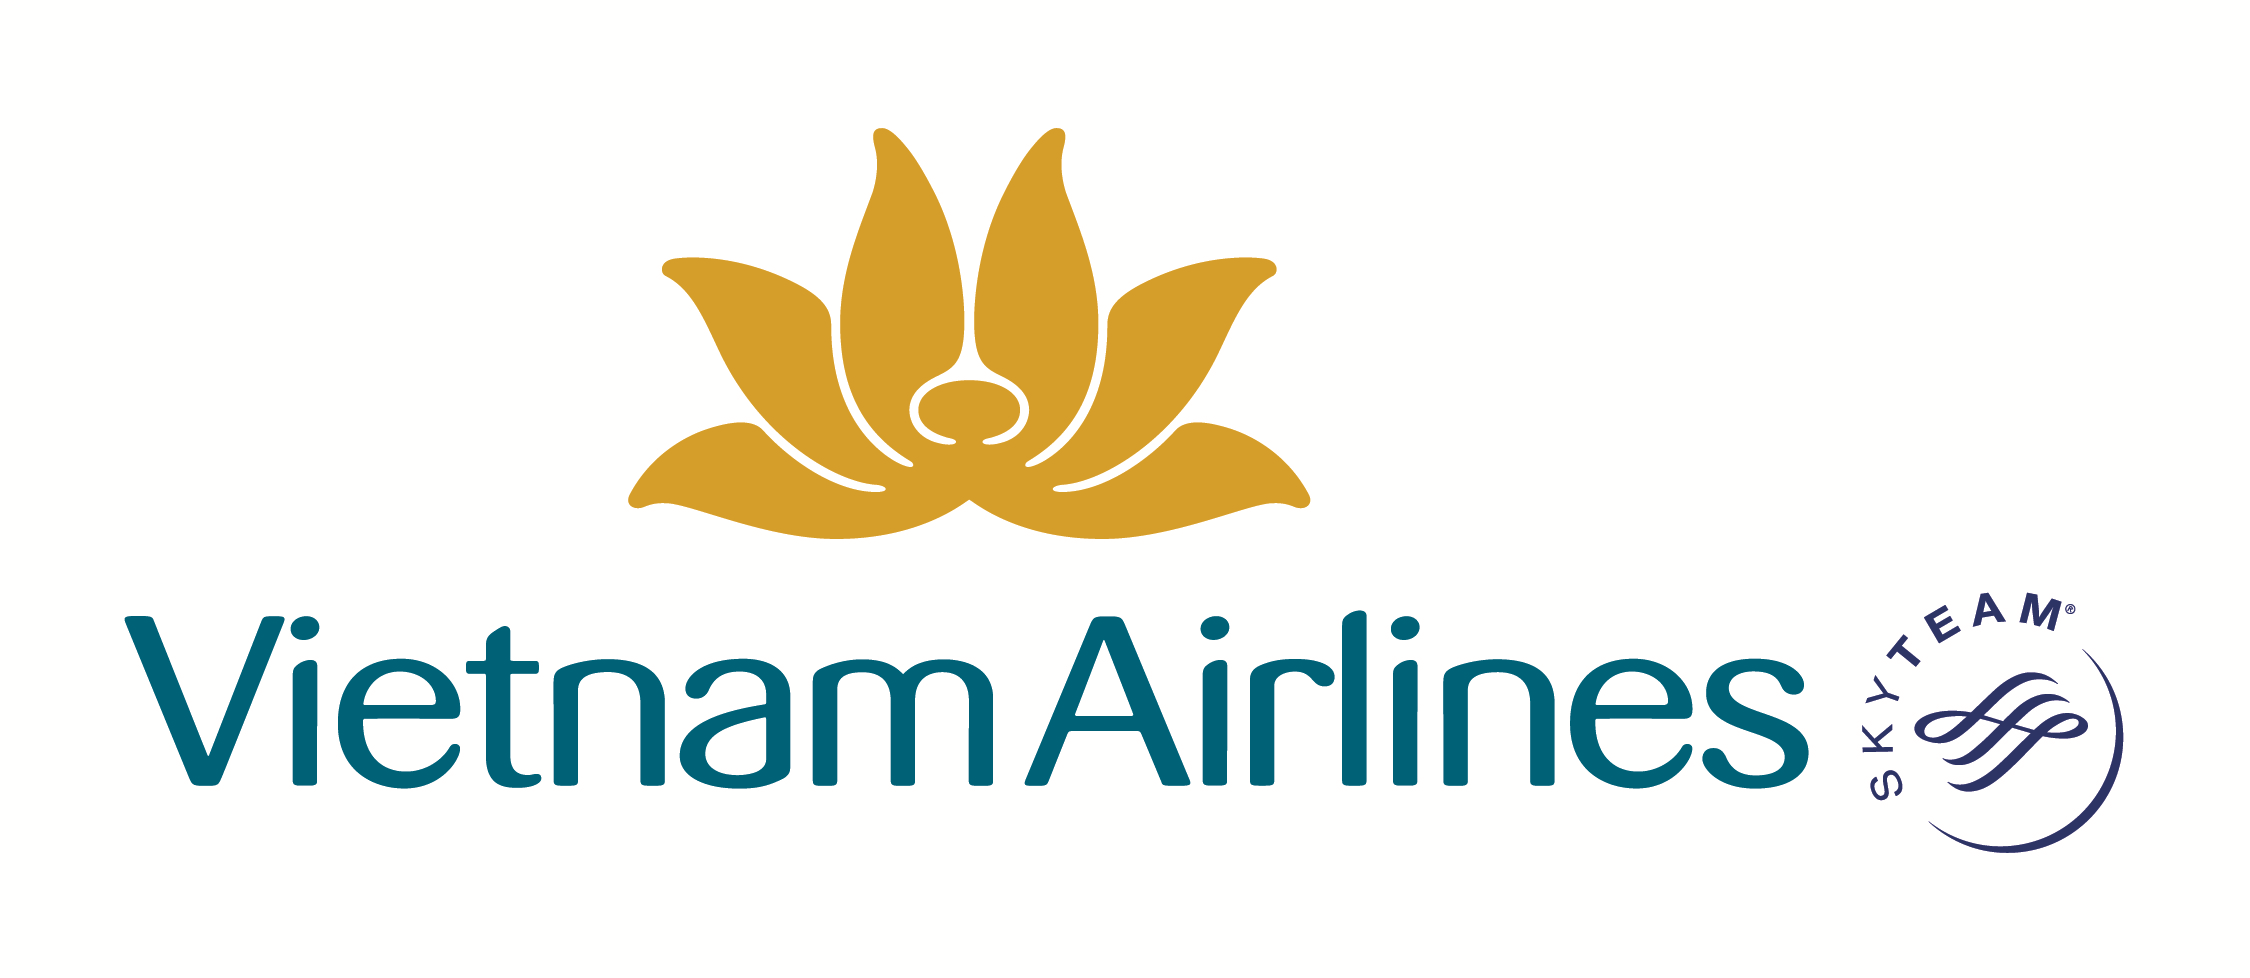 Vietnam Airlines Logo Renewed Company Logo. - Vietnam Airlines Vector, Transparent background PNG HD thumbnail